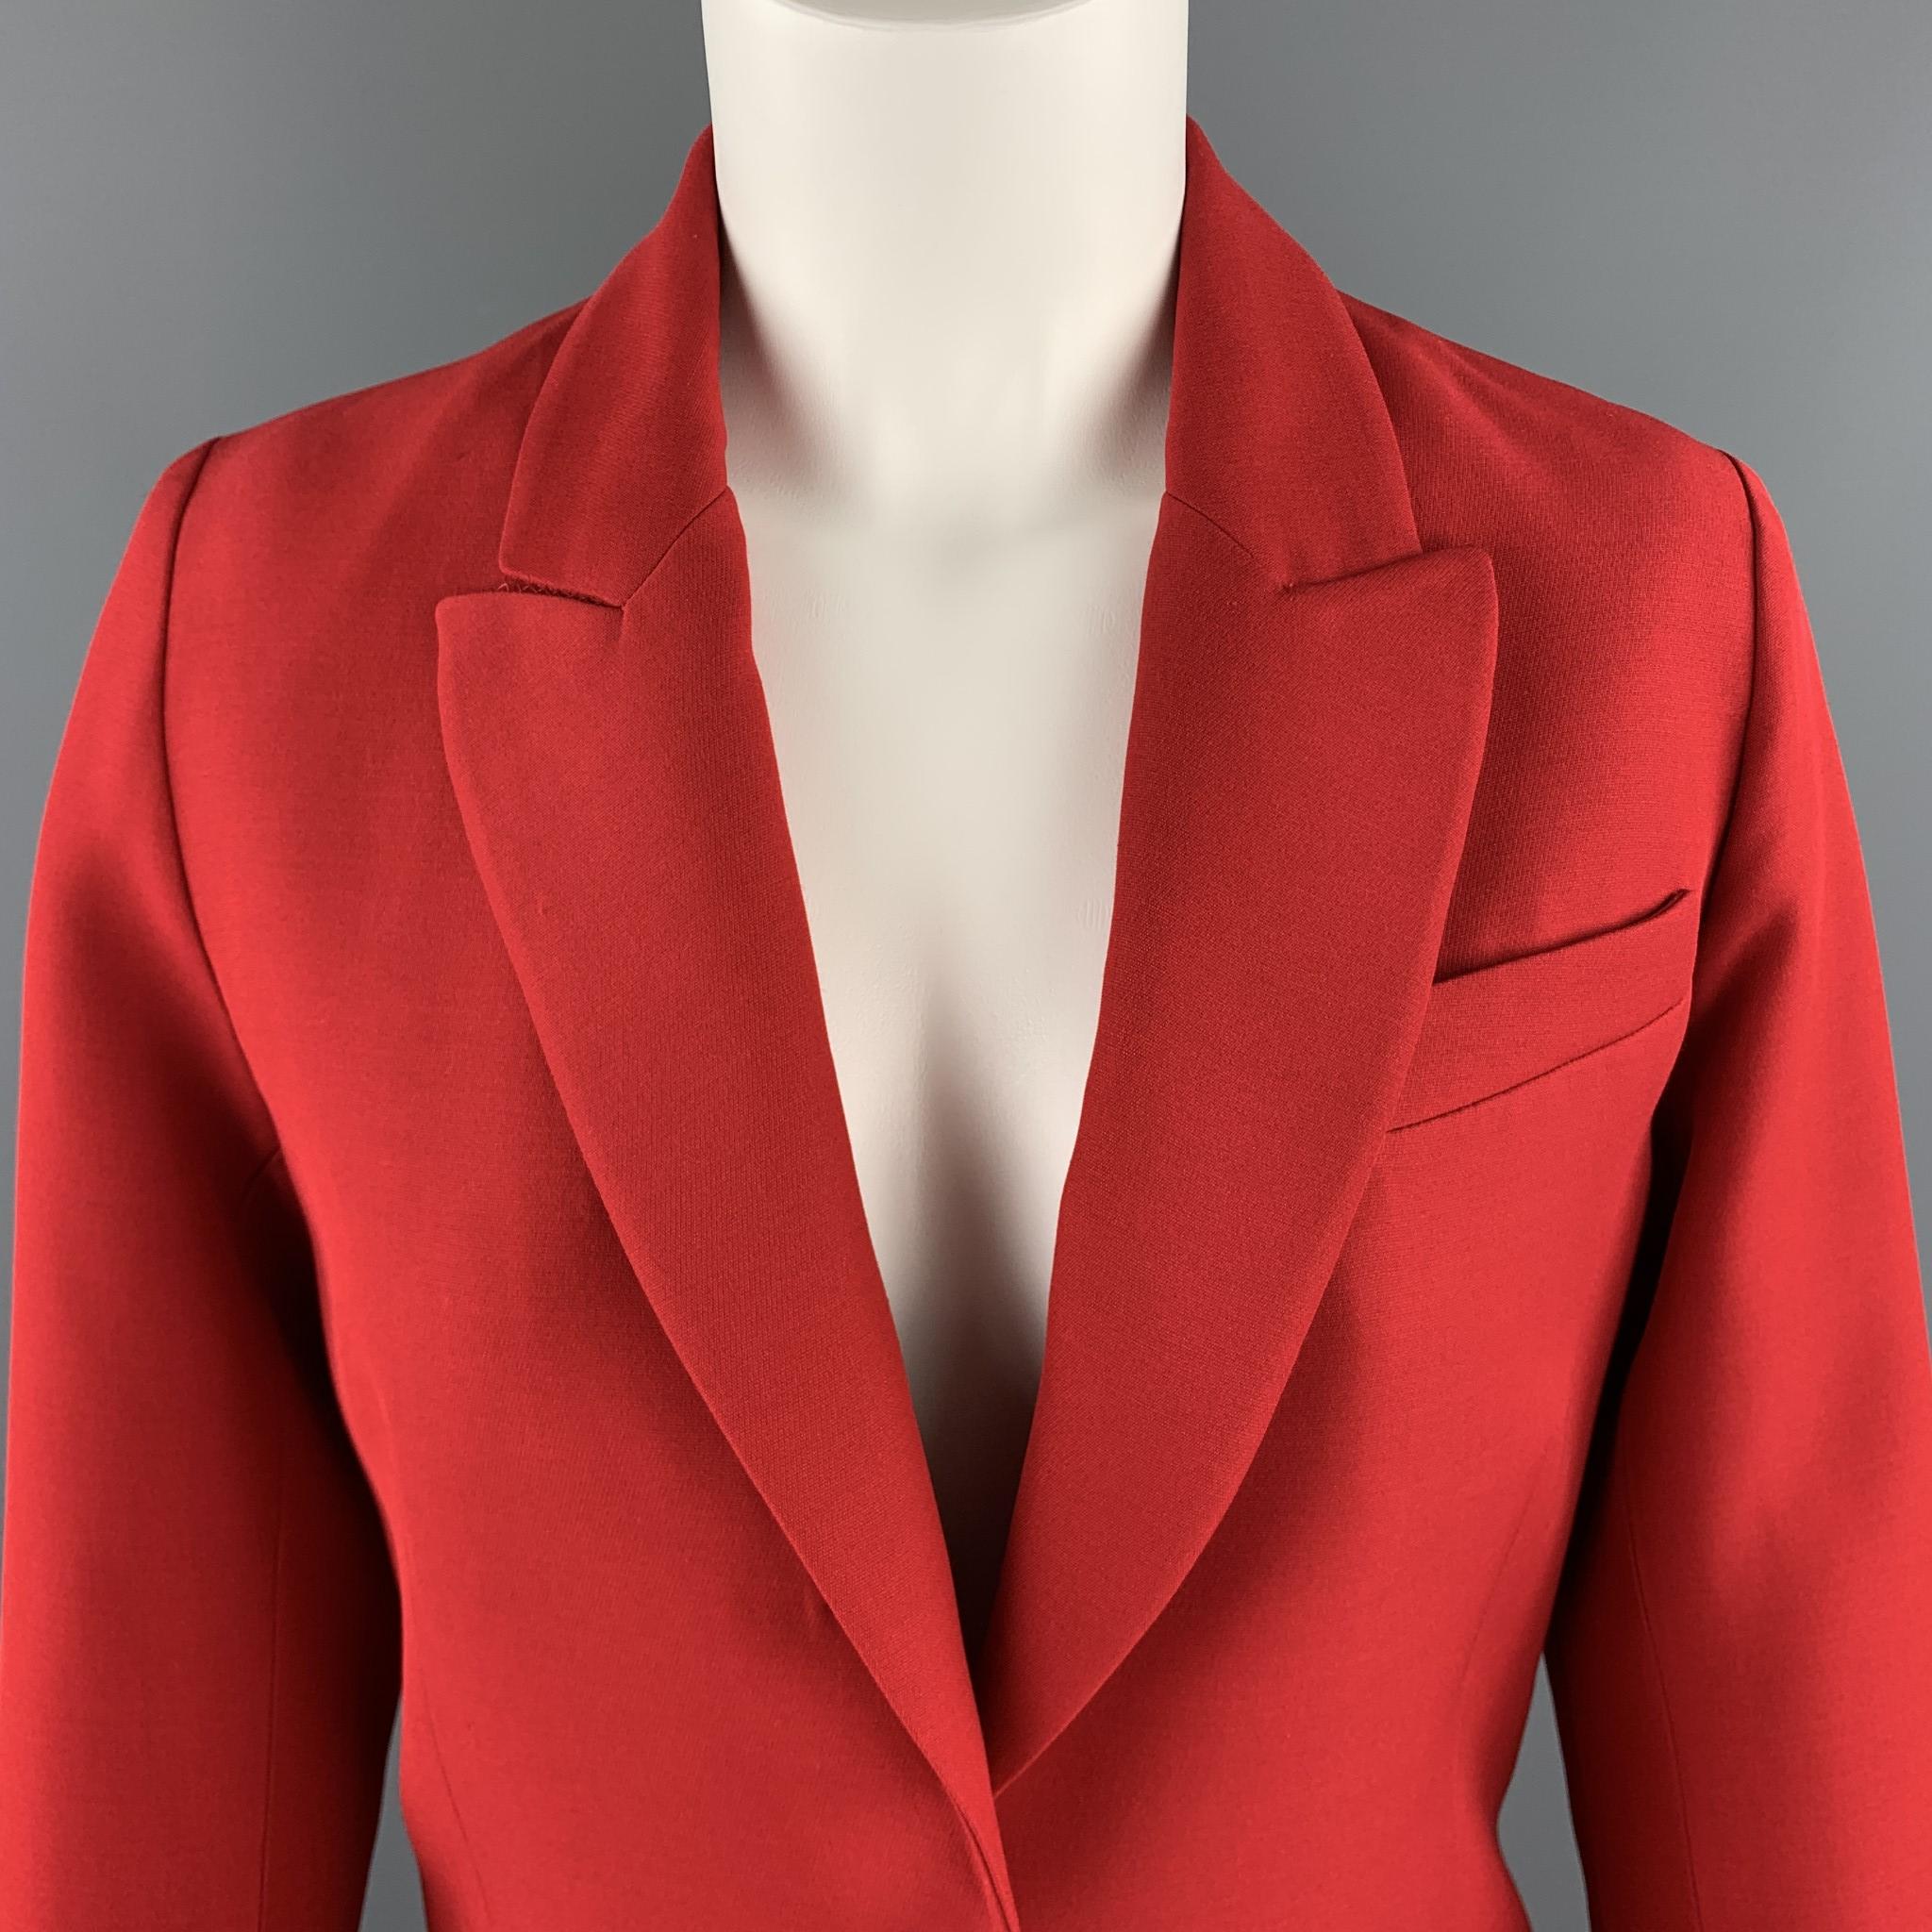 VALENTINO blazer comes in bold red silk wool blend fabric with a pak lapel, single breasted two button front, and oversized silhouette. Made in Italy.

Excellent Pre-Owned Condition.
Marked: US 2

Measurements:

Shoulder: 15.5 in.
Bust: 36